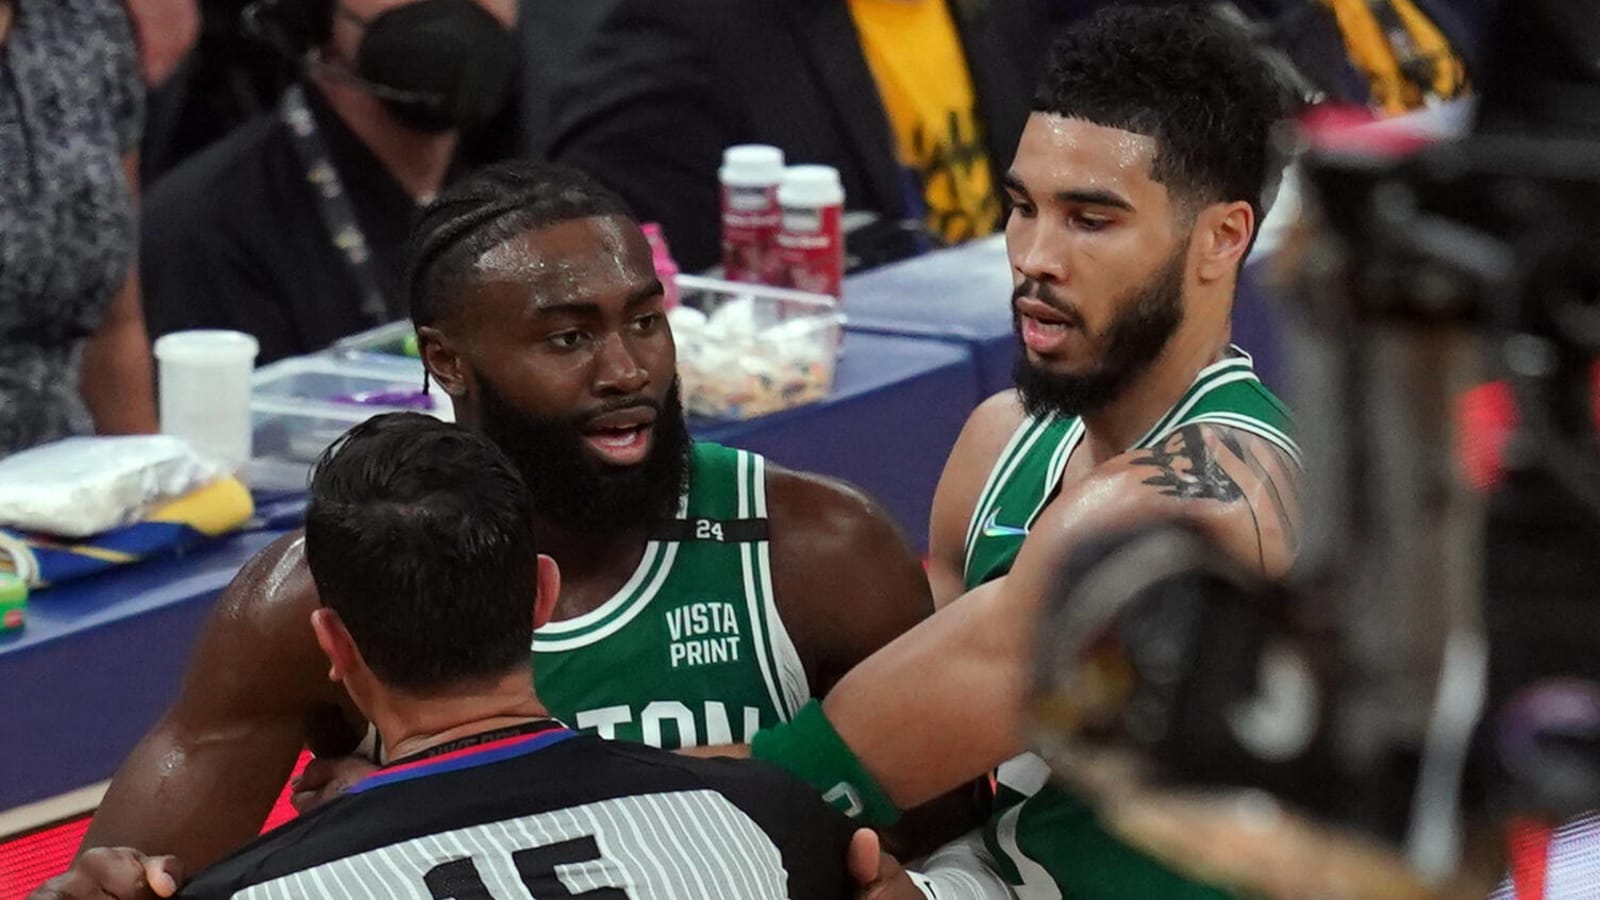 Game 5 referee assignments could be bad news for Celtics